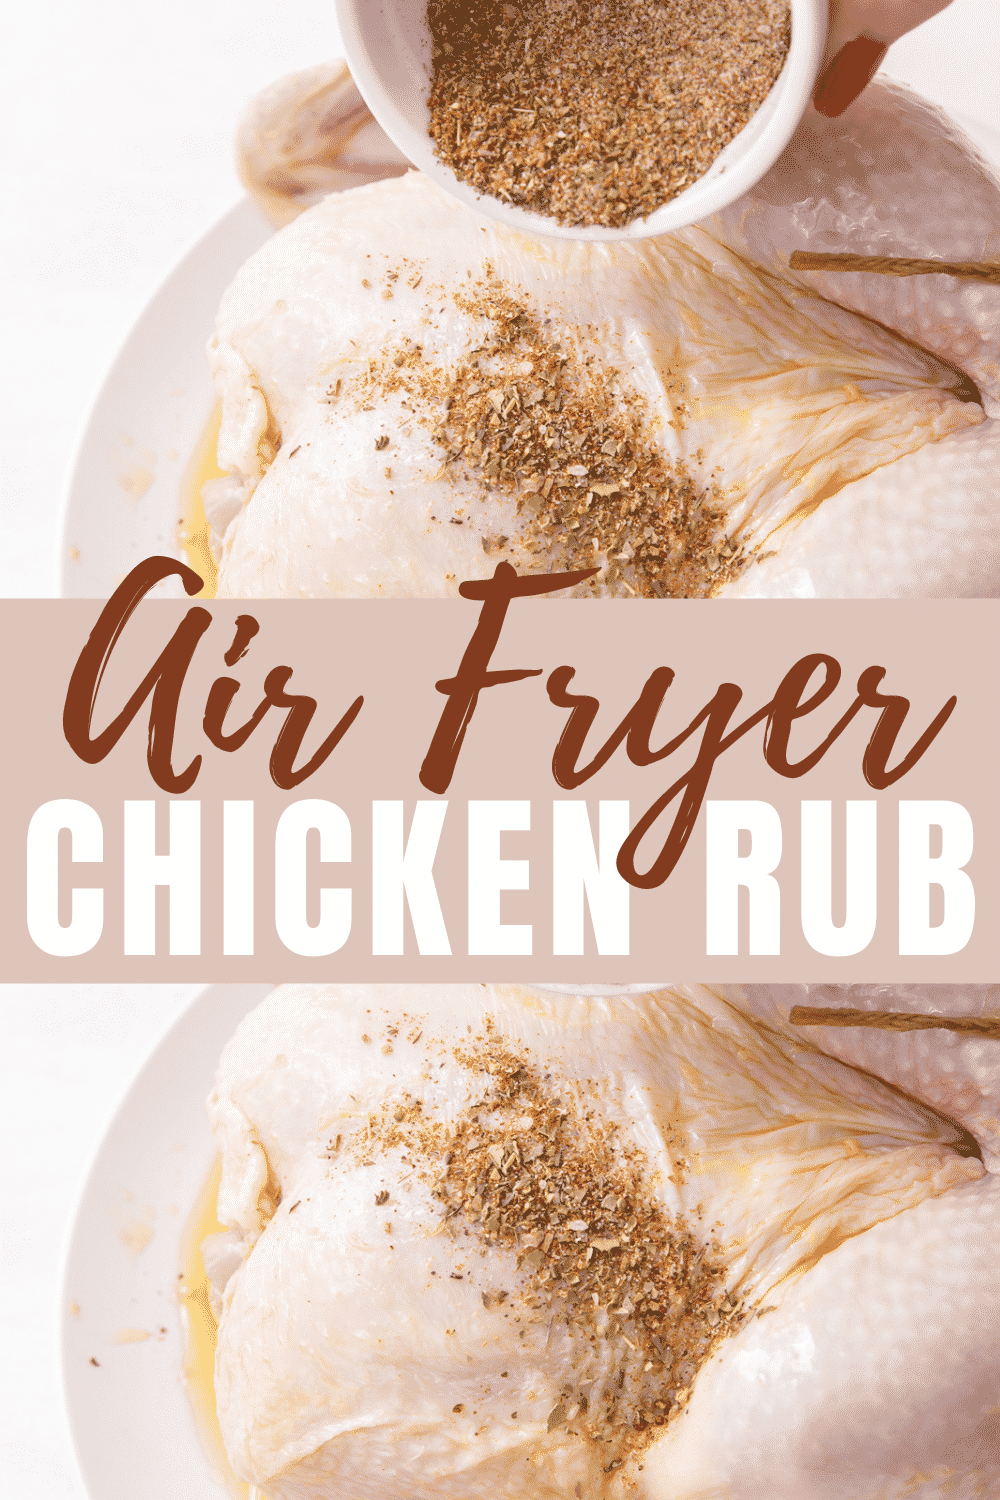 Air Fryer Chicken Wing Dry Rub makes the juiciest meat with no sauce in sight! You just need 6 pantry staple spices for the best homemade dry rub on wings, thighs, legs, or even a roasted whole chicken! via @vegetarianmamma